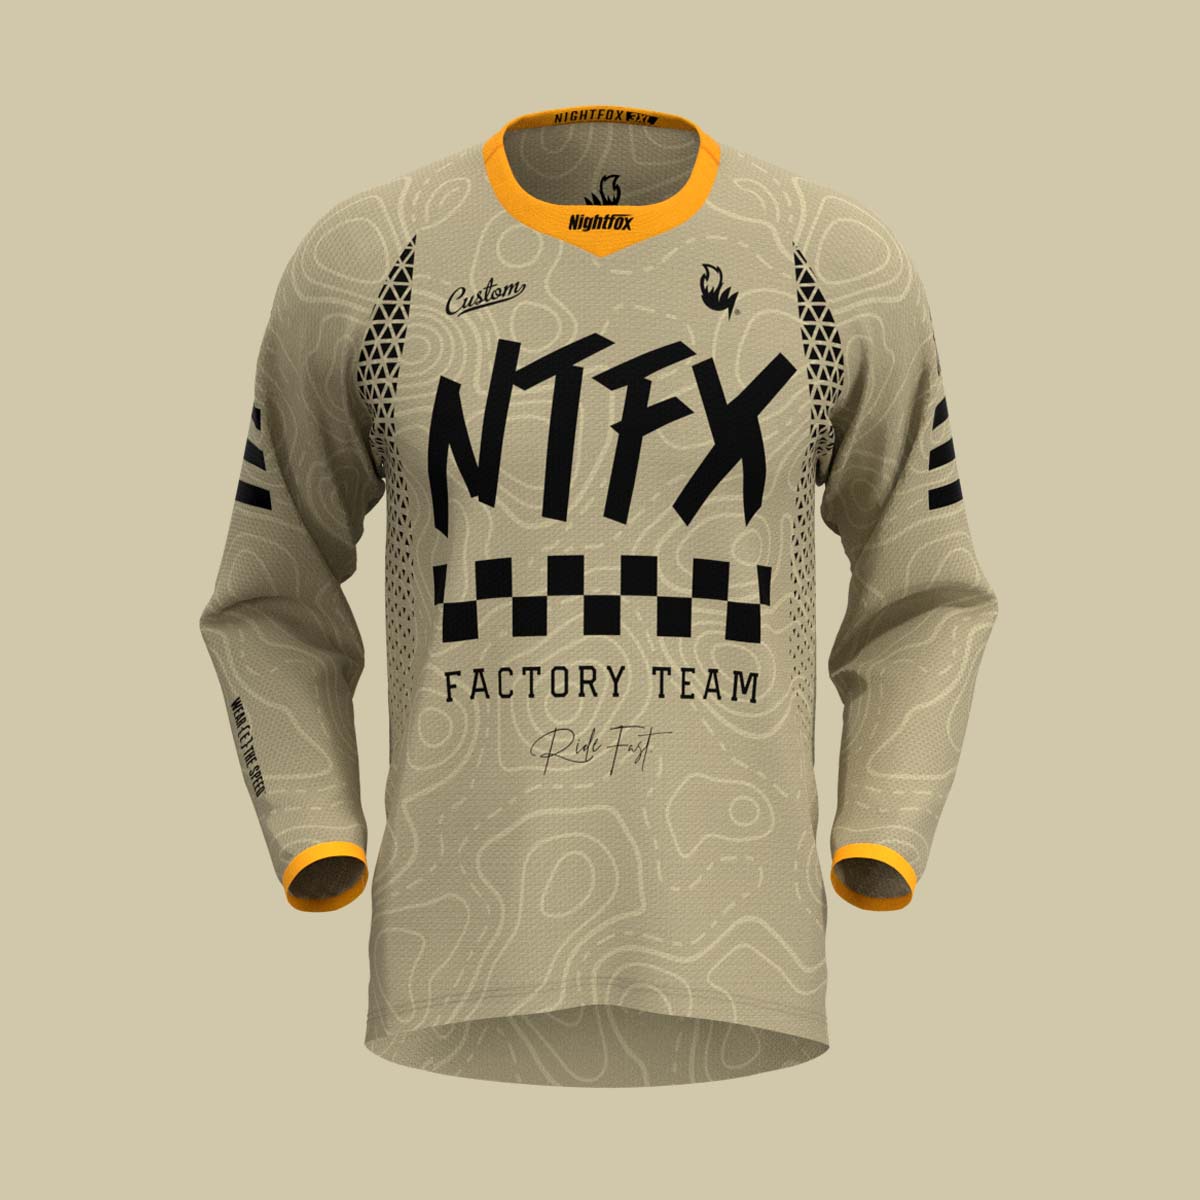 Customize your own slim fit Raceforce MTB Jersey featuring breathable mesh panels, fully customizable design, offered by Nightfox with no minimum order required.